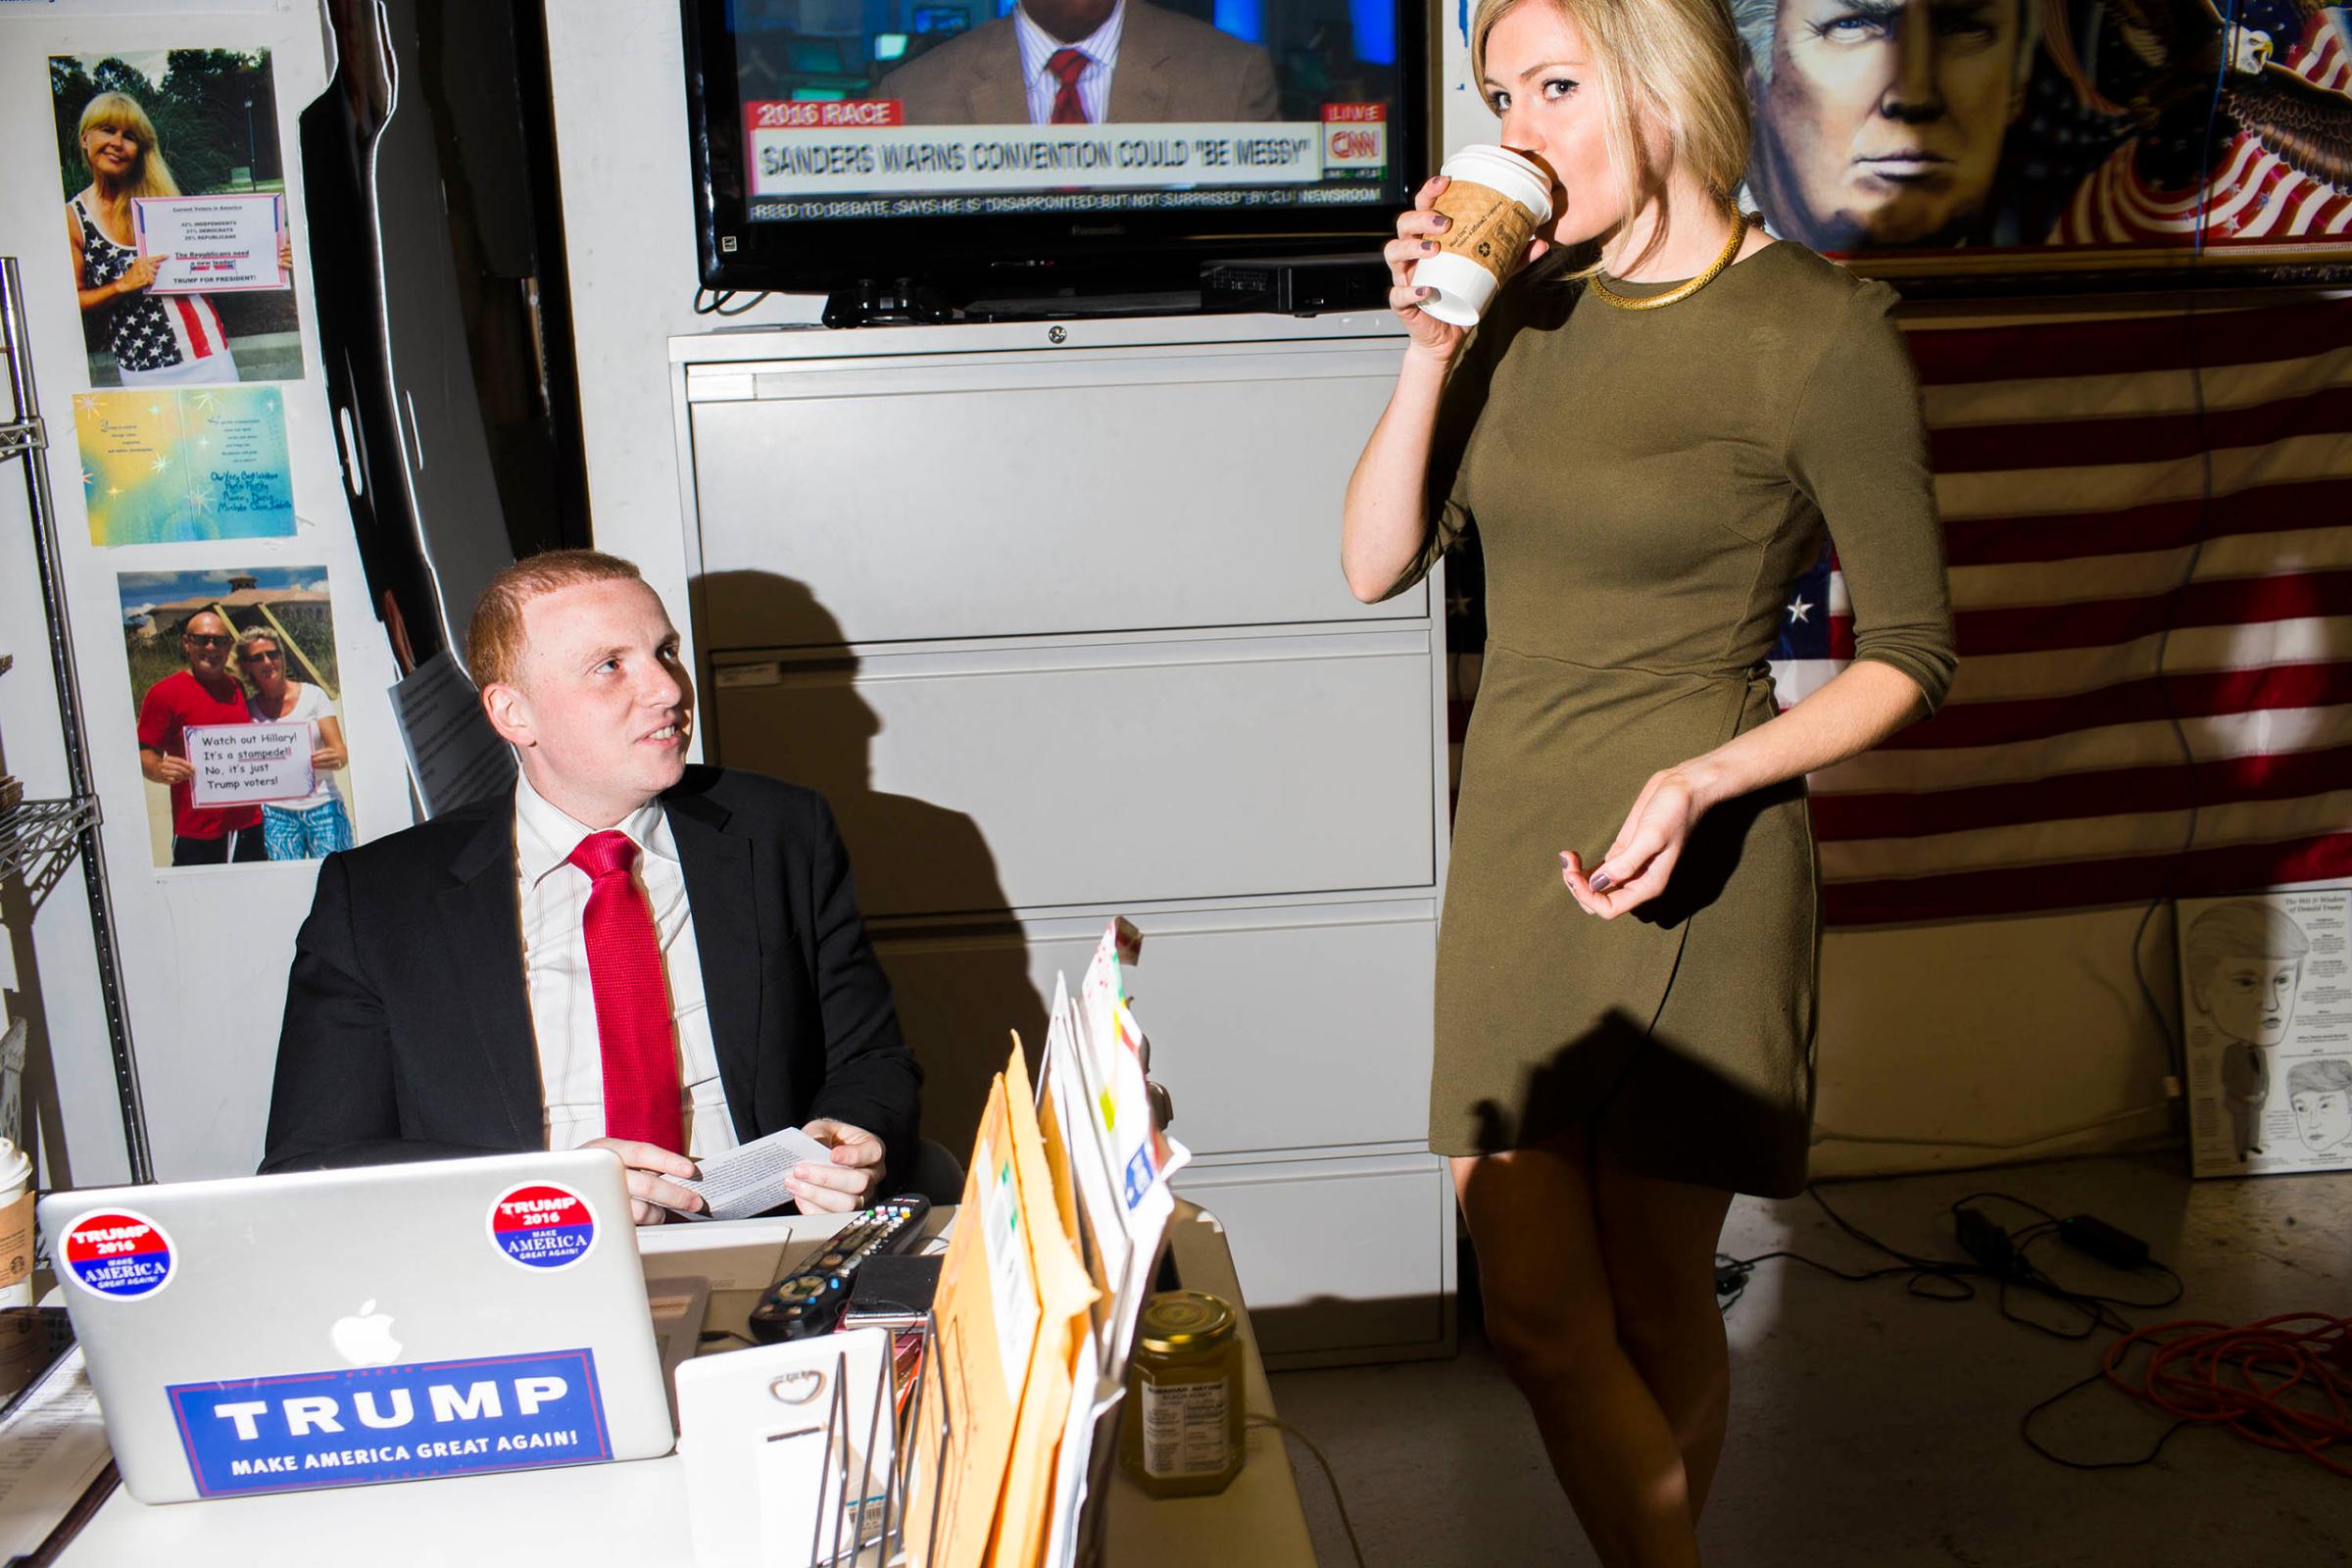 NEW YORK - MAY 24: Scenes from Inside the campaign headquarters of Donald Trump on May 24, 2016, in Trump Tower in New York City. (Photo by Landon Nordeman)